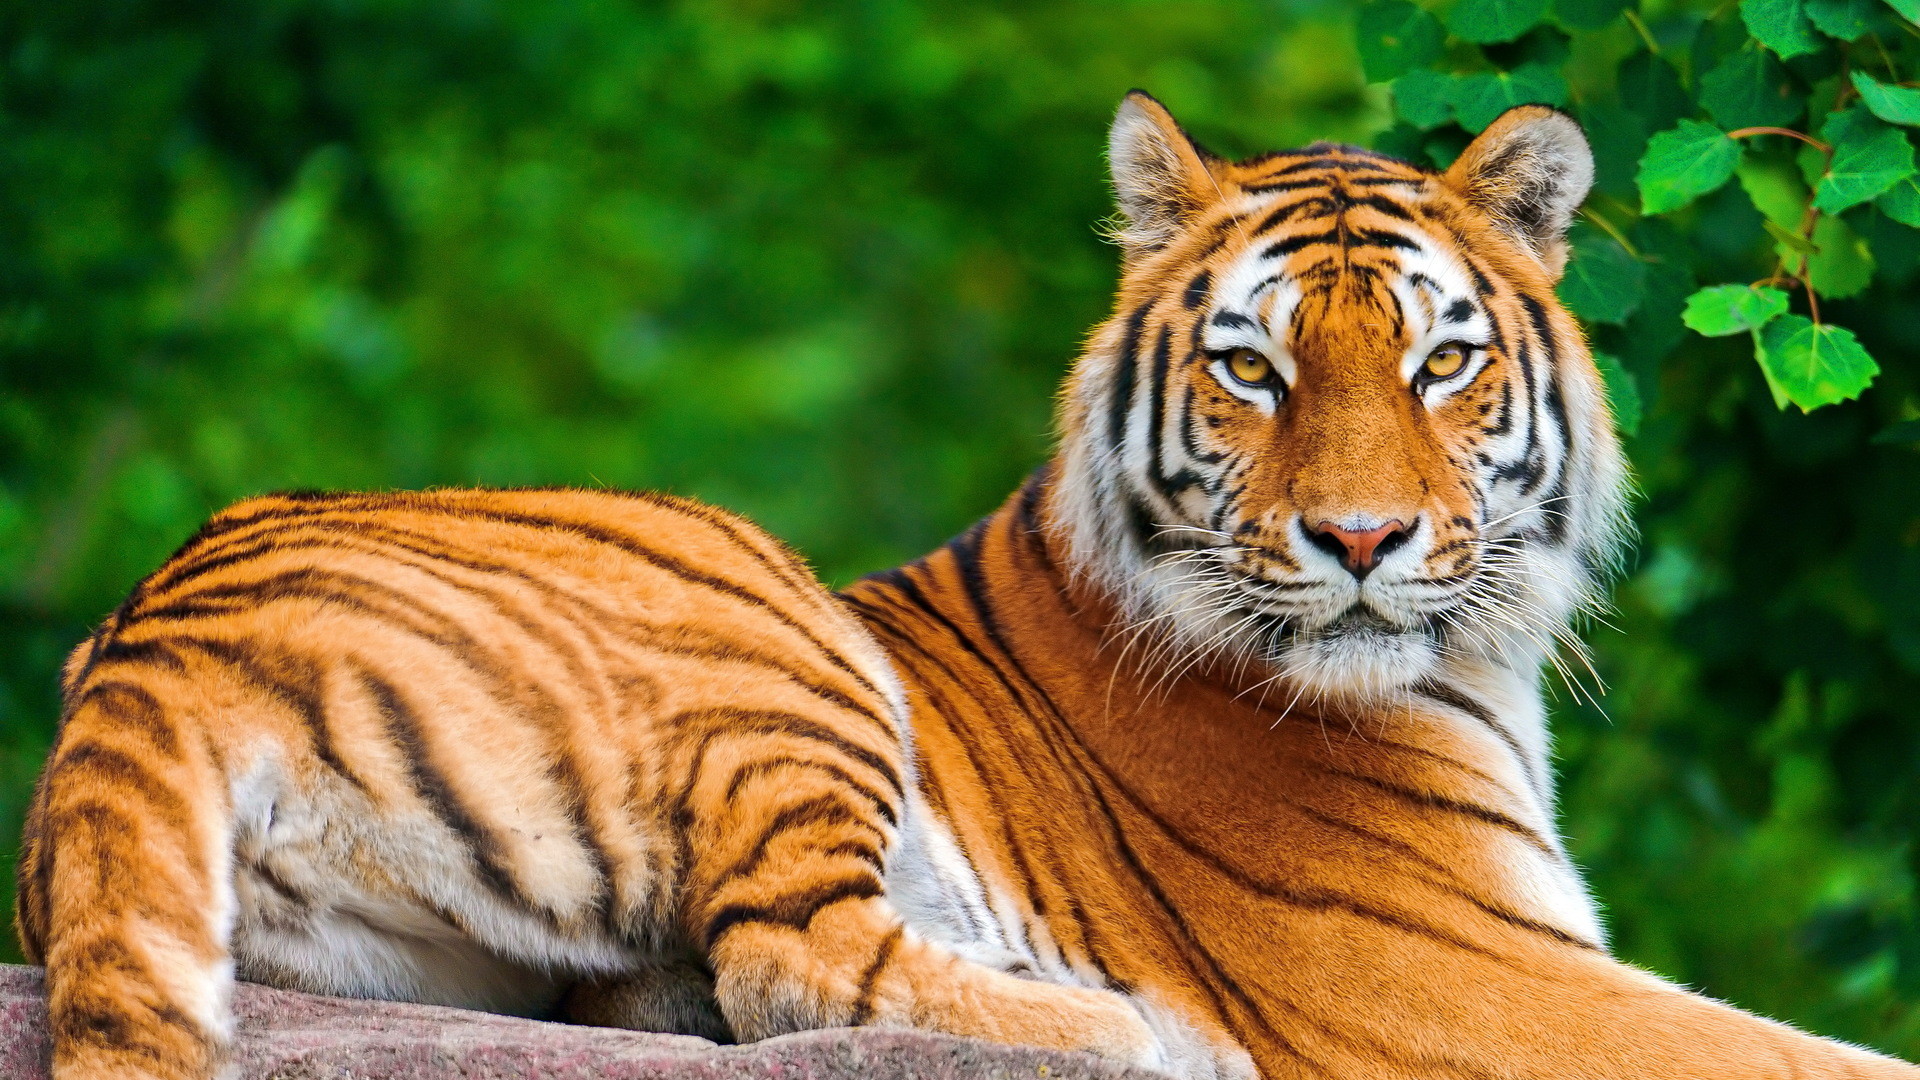 1920x1080 Download free Tiger Wallpapers. Amazing collection of full screen Tiger HD  Wallpapers at 2880x1800,